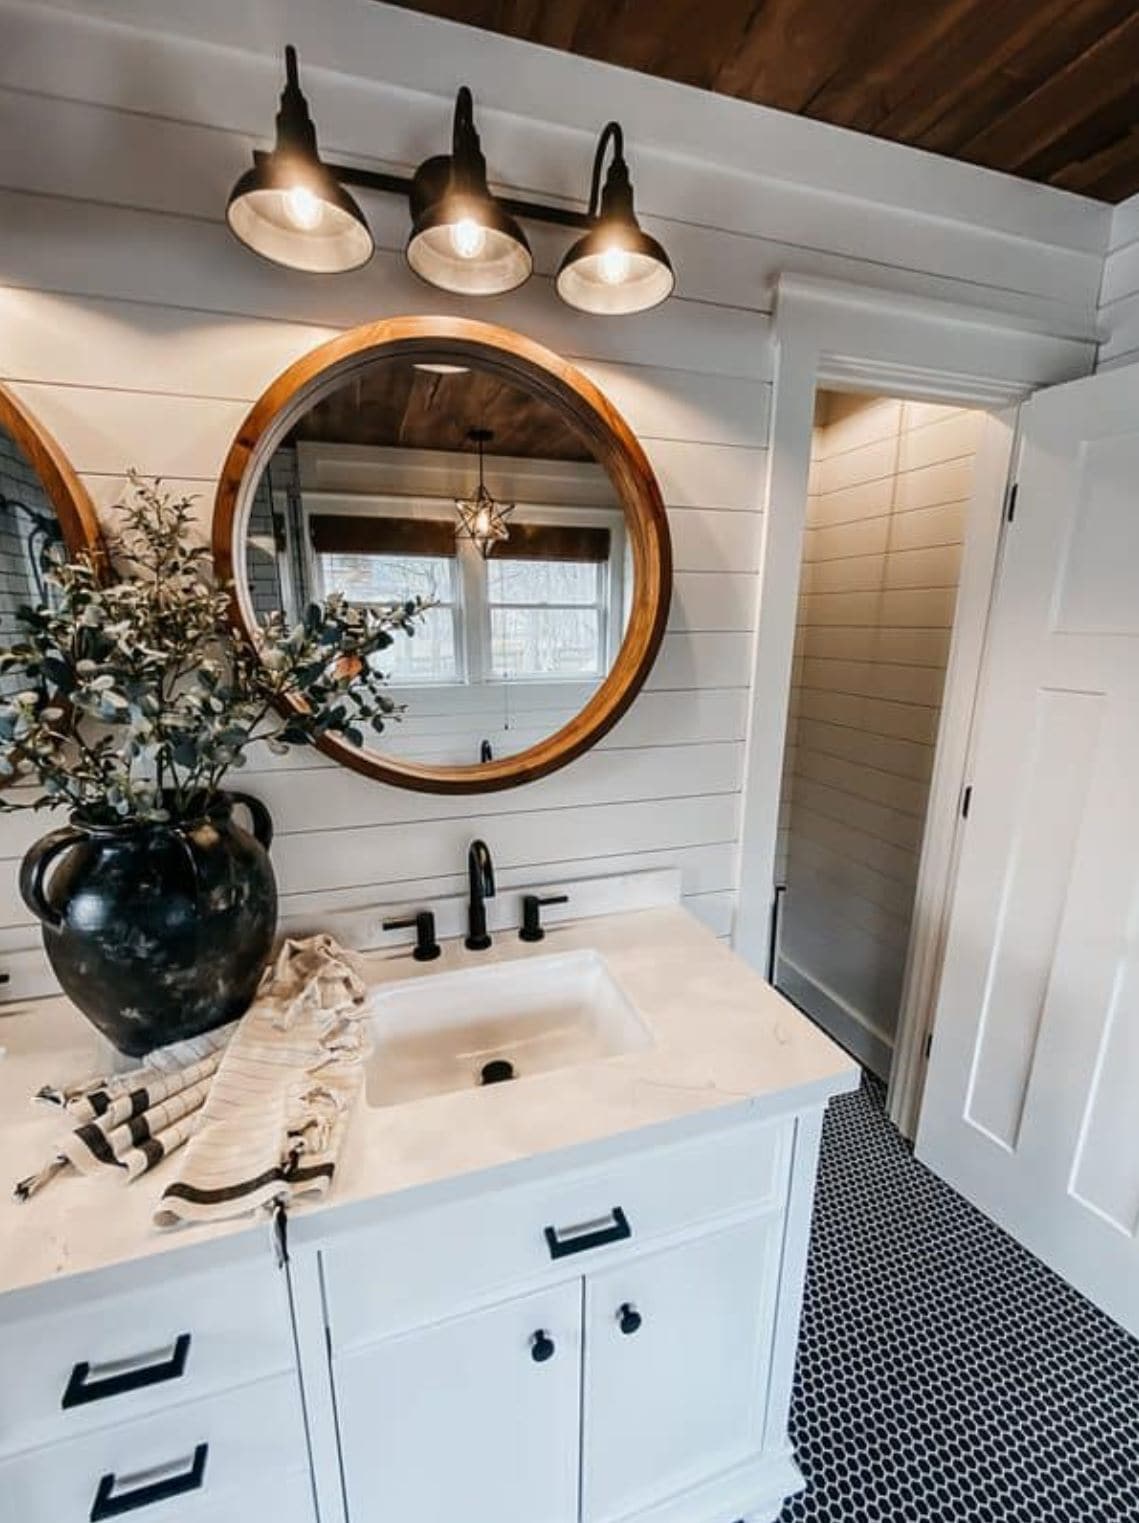 A black and white bathroom with shiplap paneling behind the vanity and up to the ceiling.